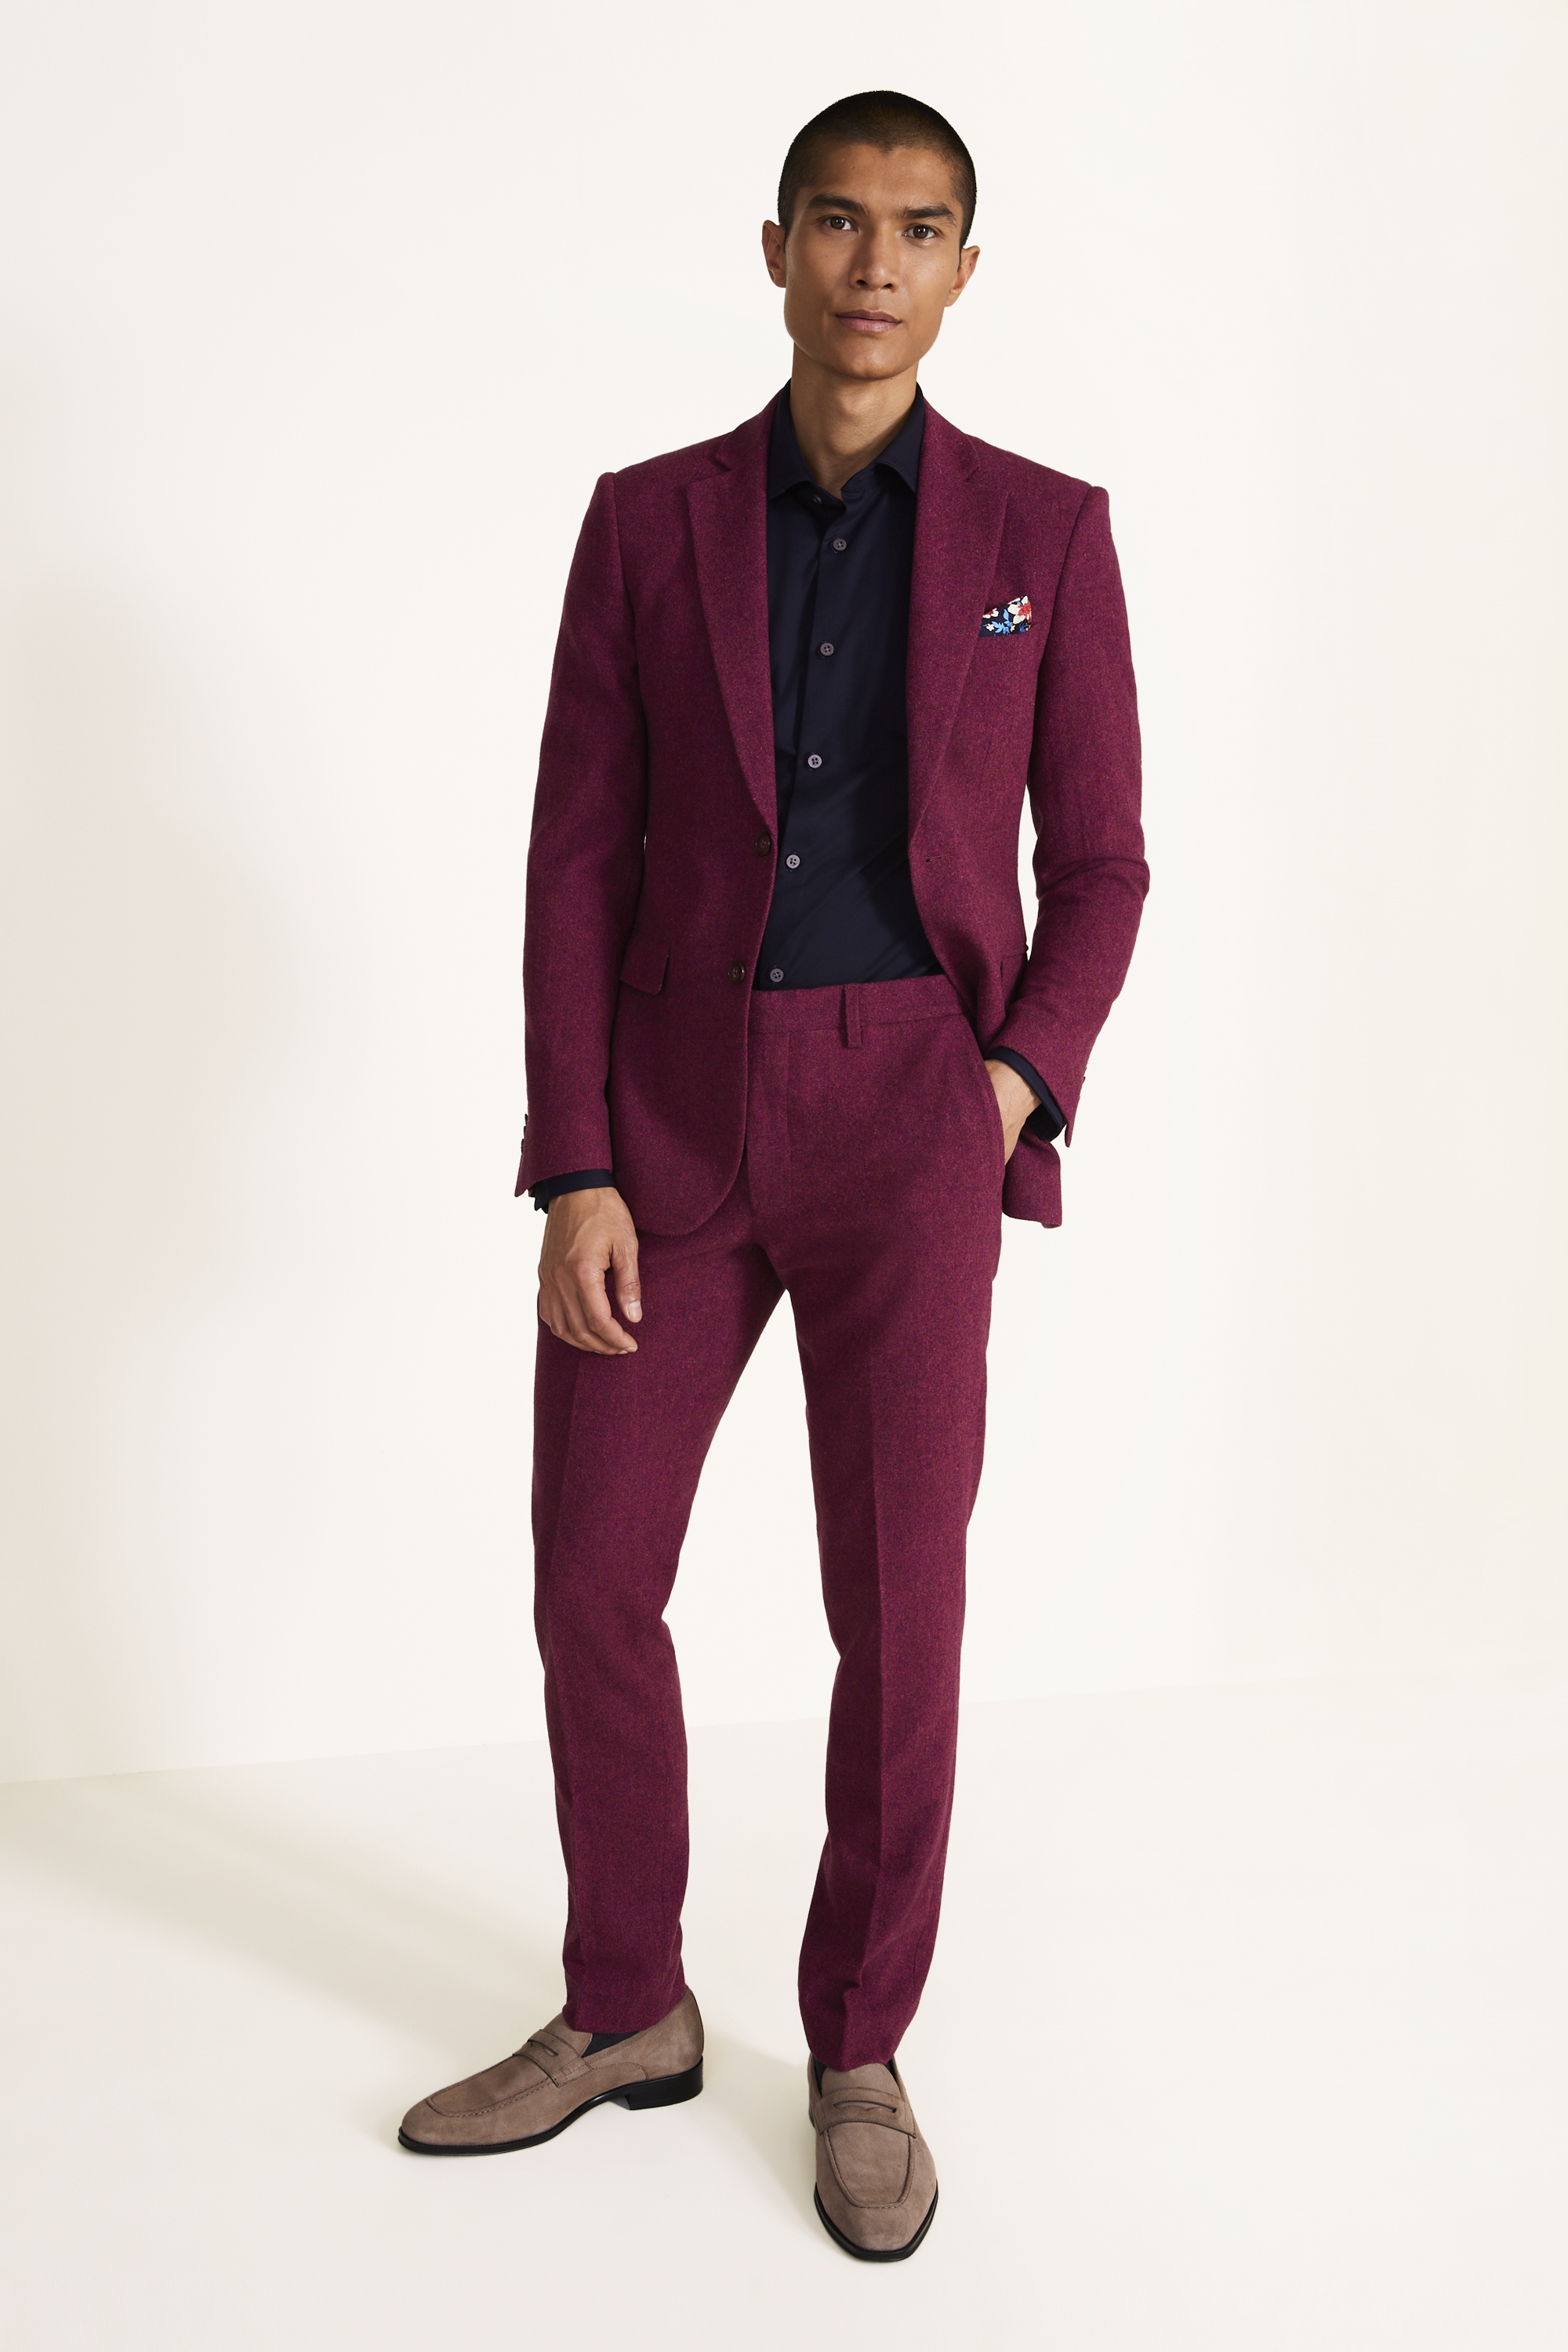 Slim Fit Fuchsia Donegal Tweed Jacket | Buy Online at Moss